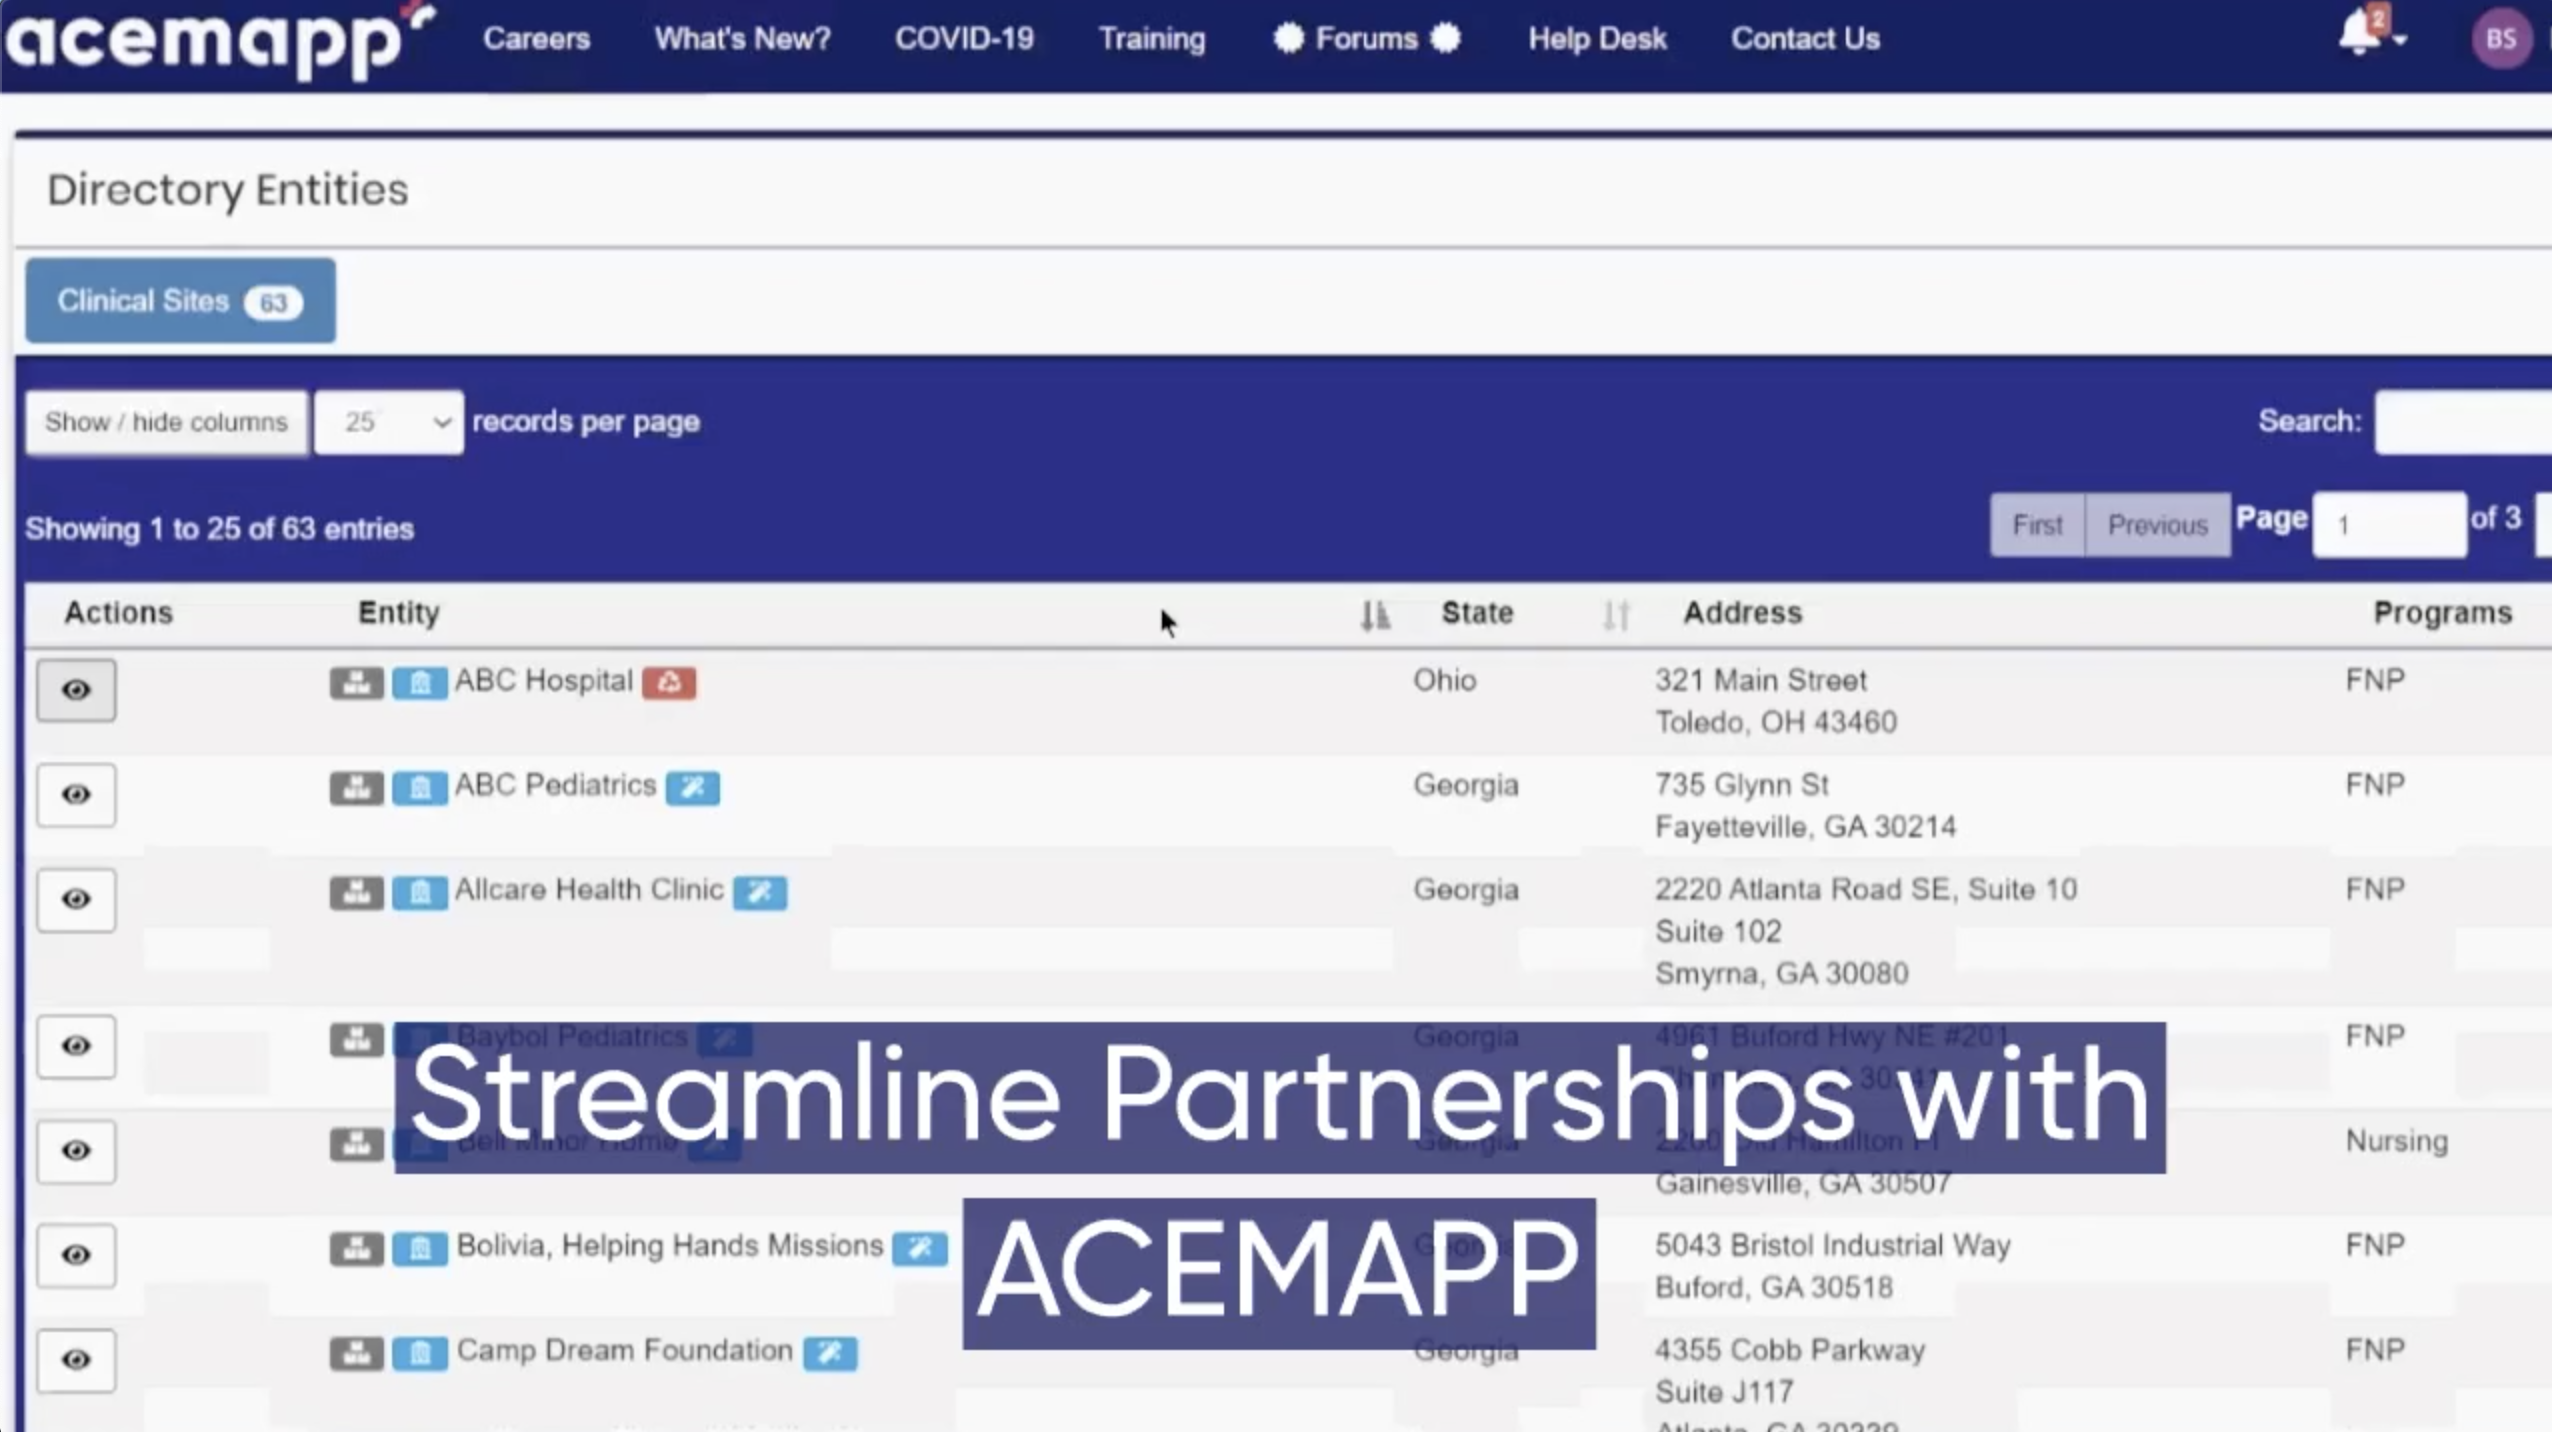 screen shot for Streamline Partnerships with ACEMAPP